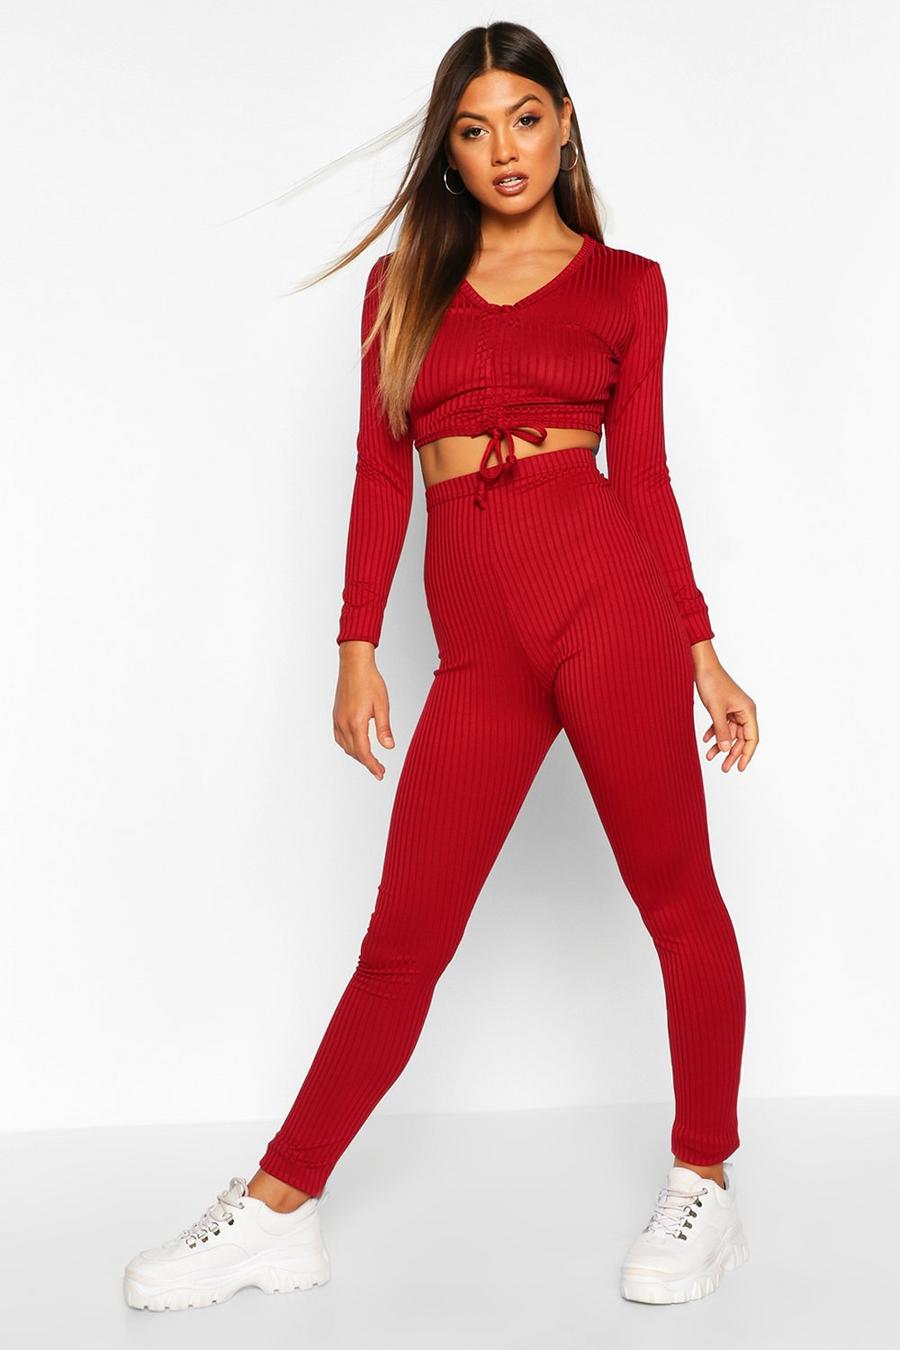 Berry Rib Tie Drawstring Top And Legging Co-Ord Set image number 1